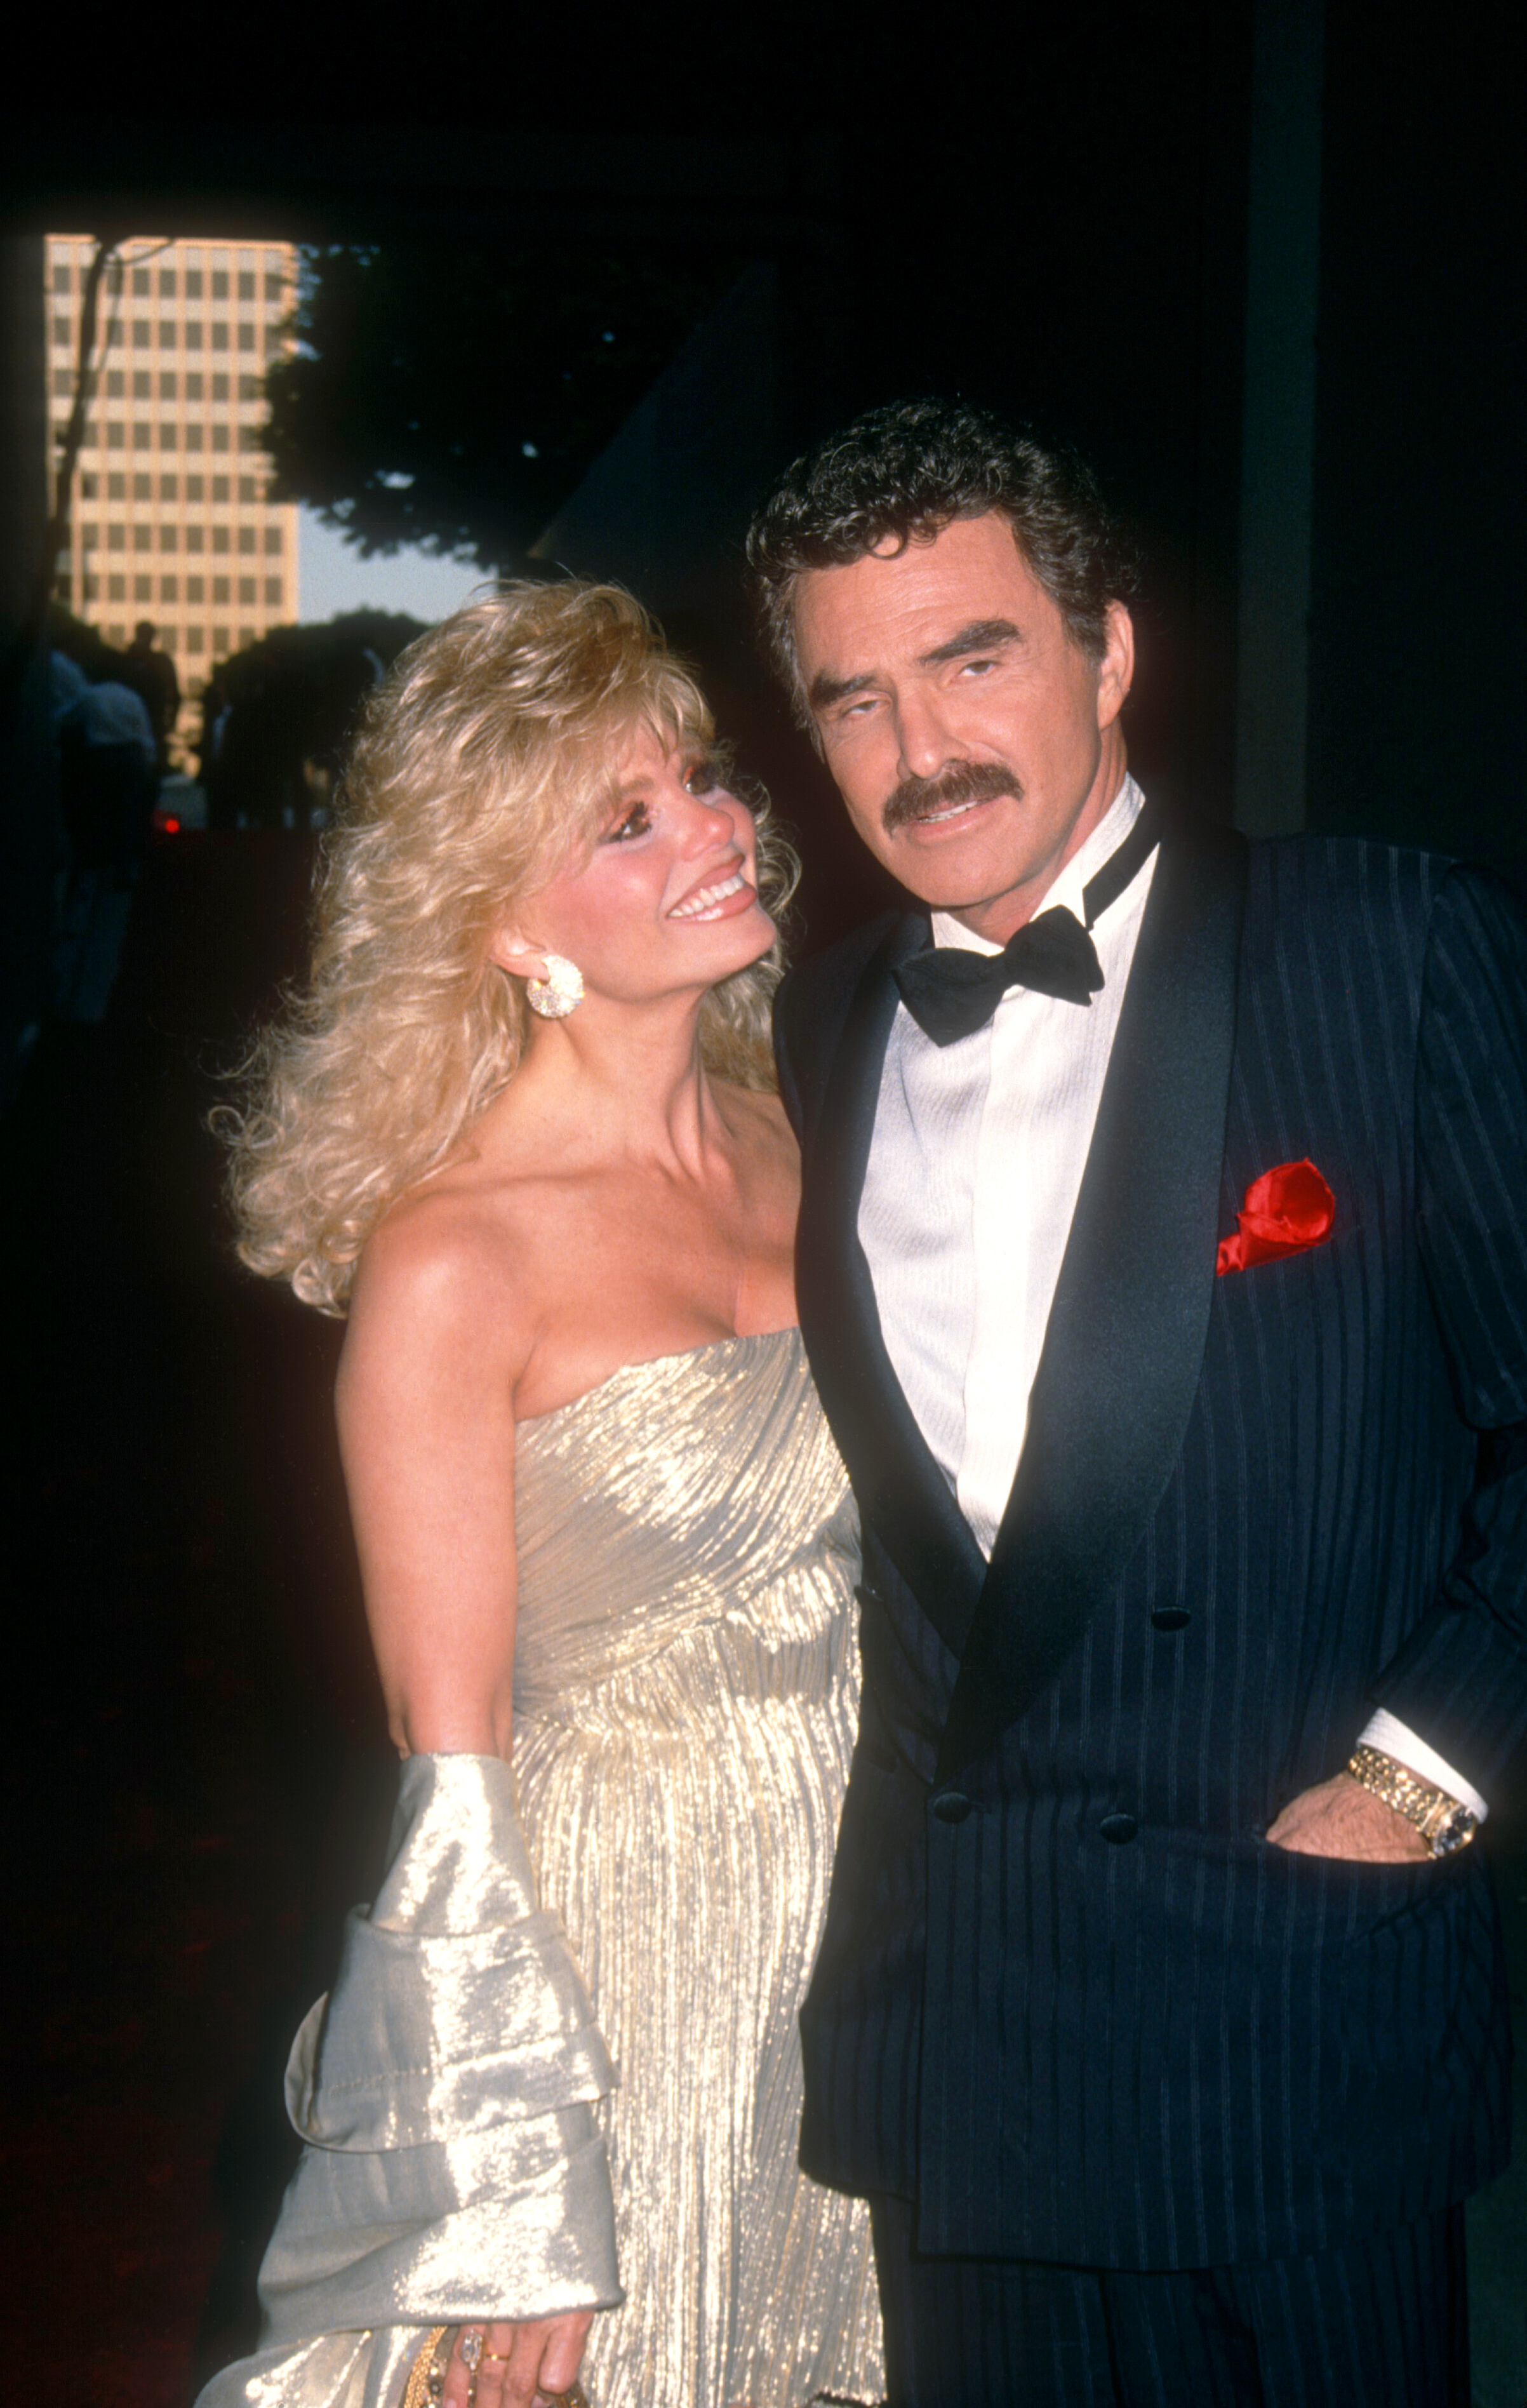 Loni Anderson and Burt Reynolds in California in 1992 | Source: Getty Images